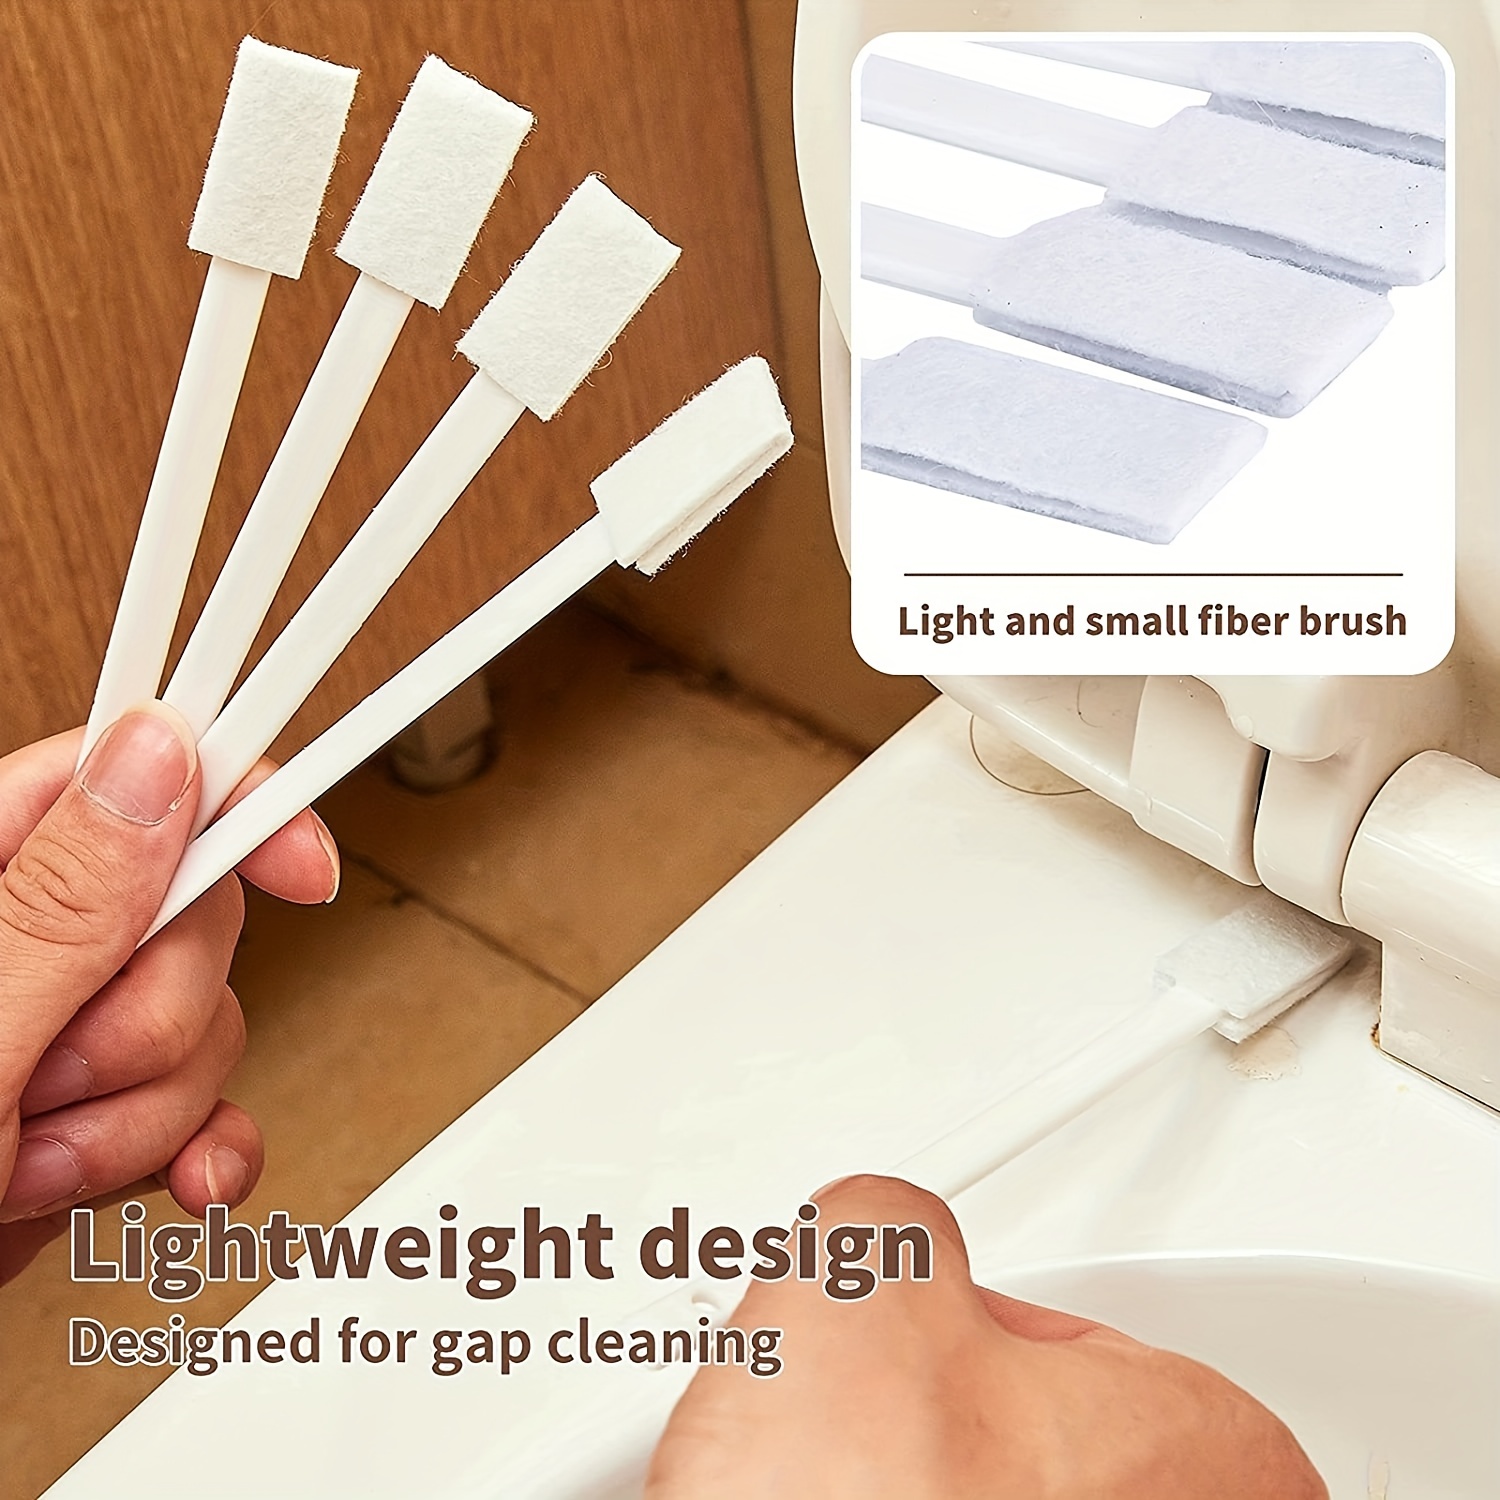 Small Disposable Crevice Cleaning Brushes, For Toilet Corner